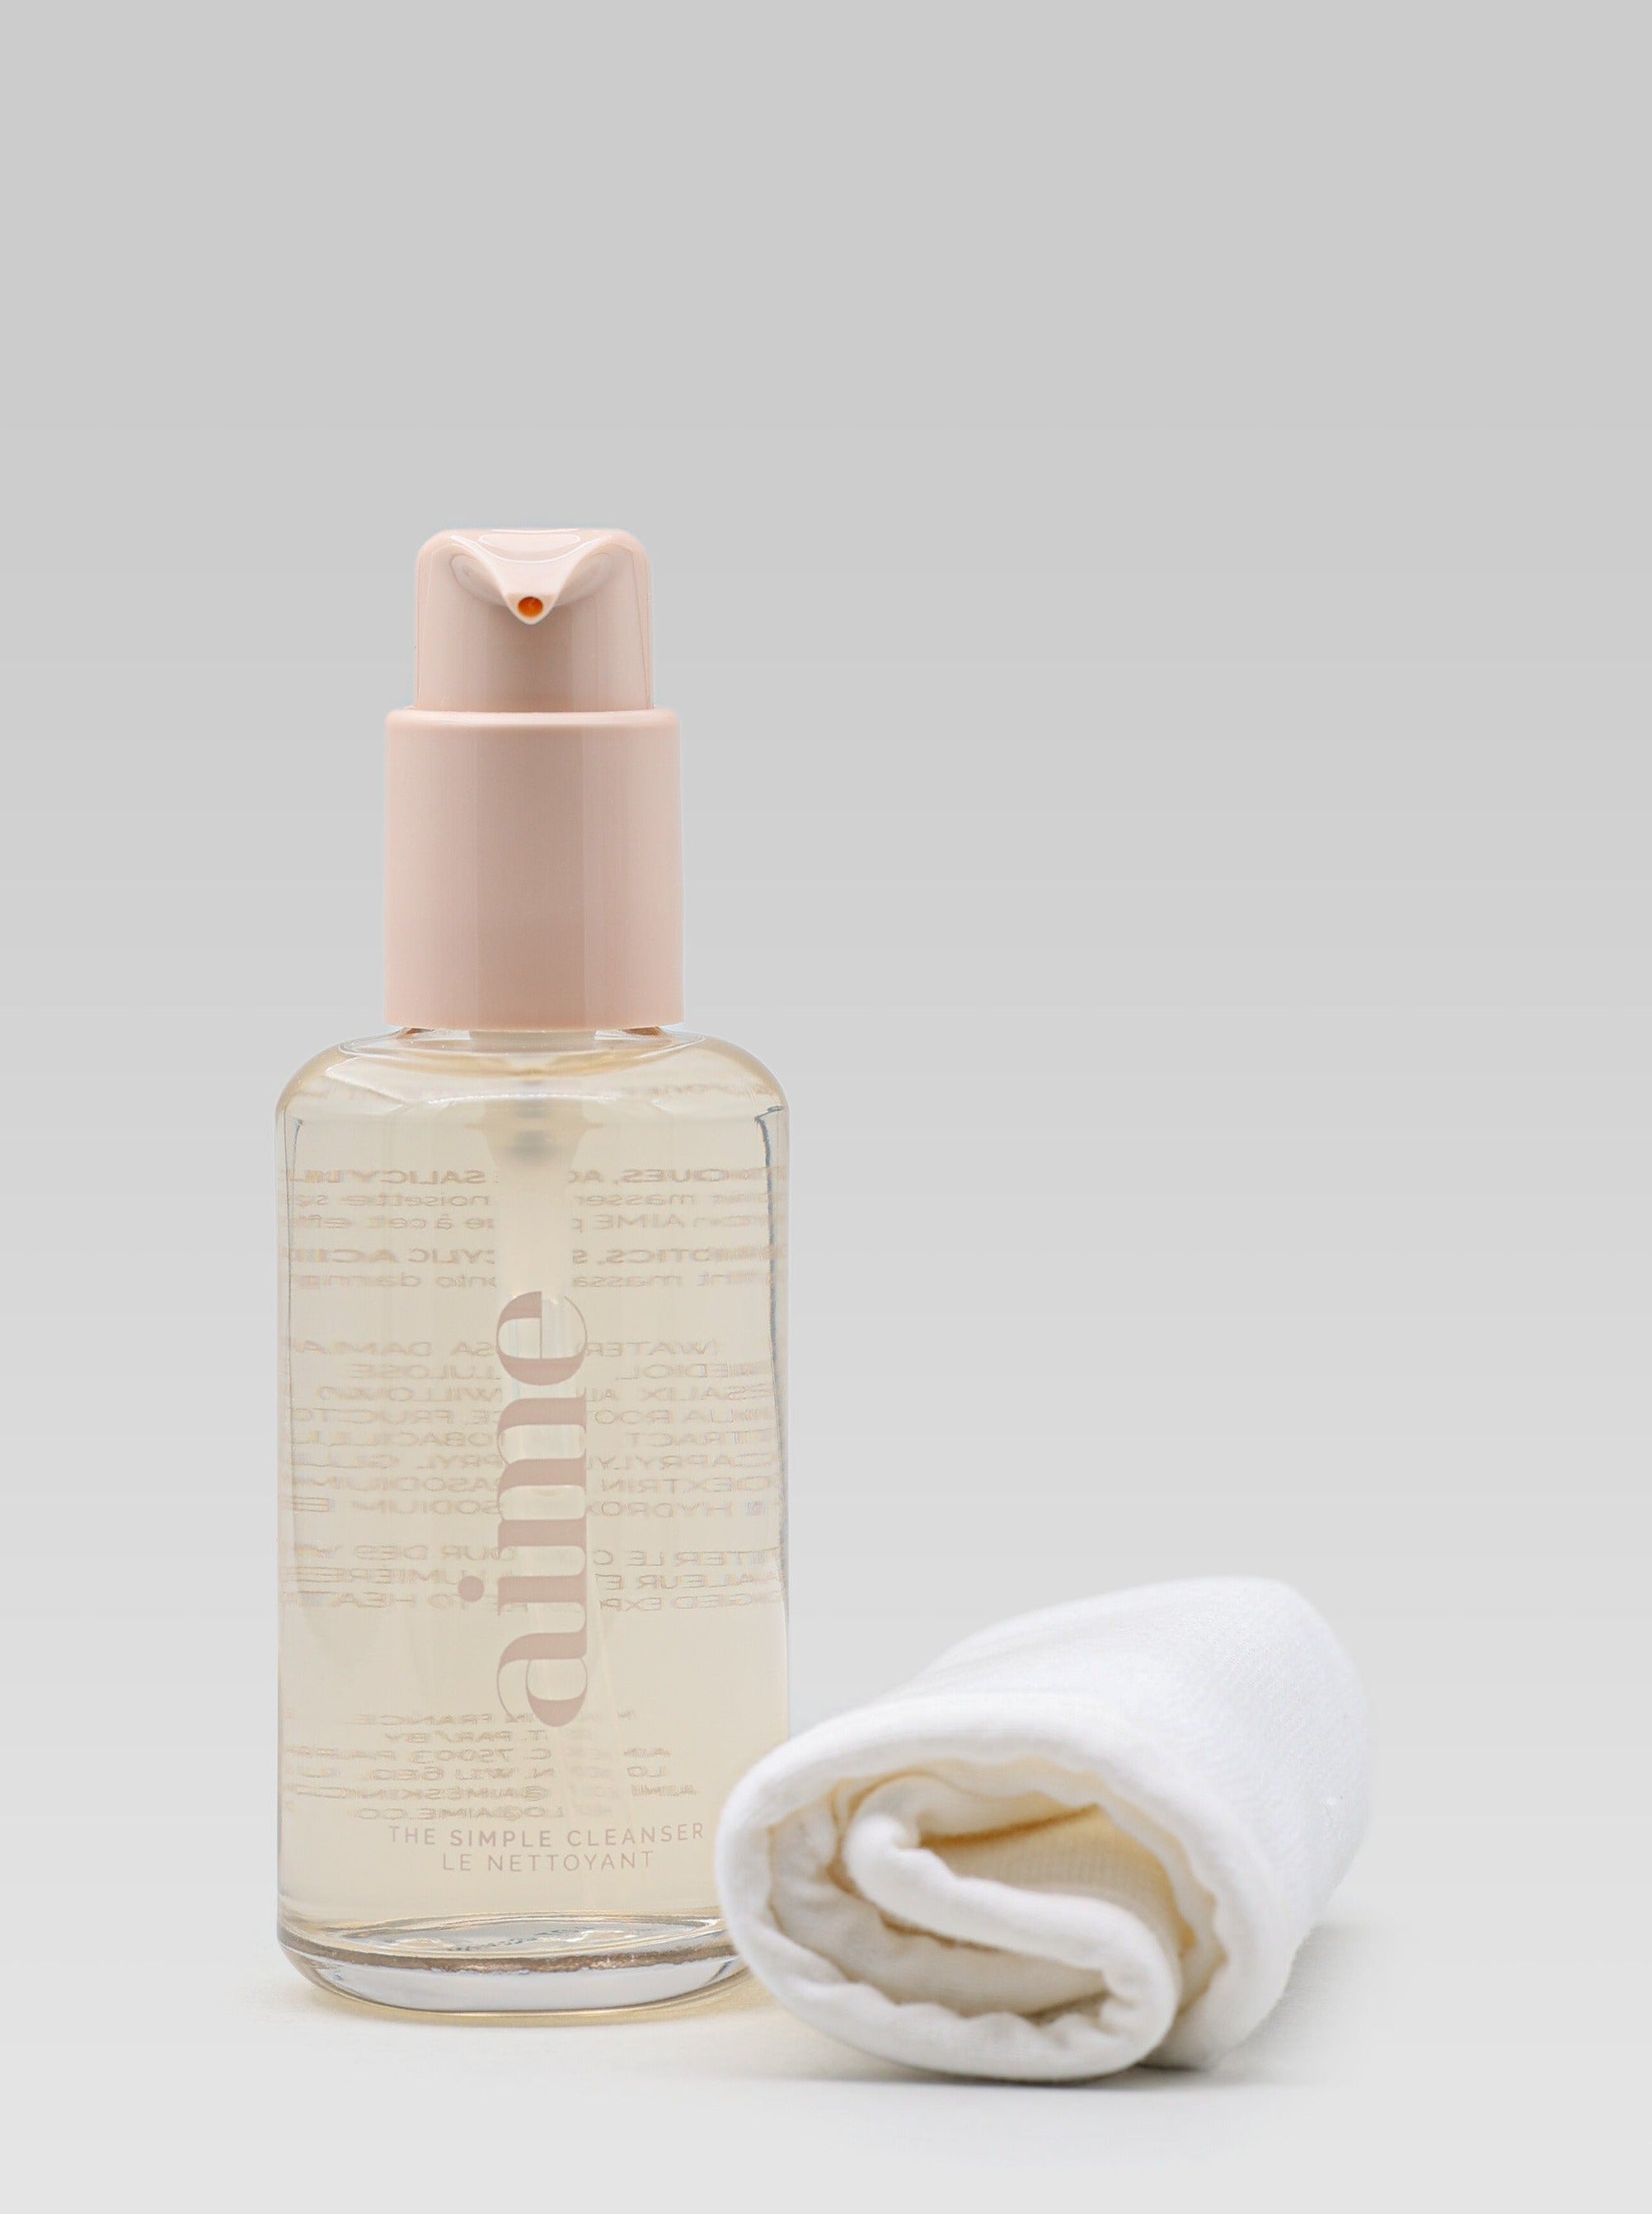 Aime The Simple Cleanser product shot